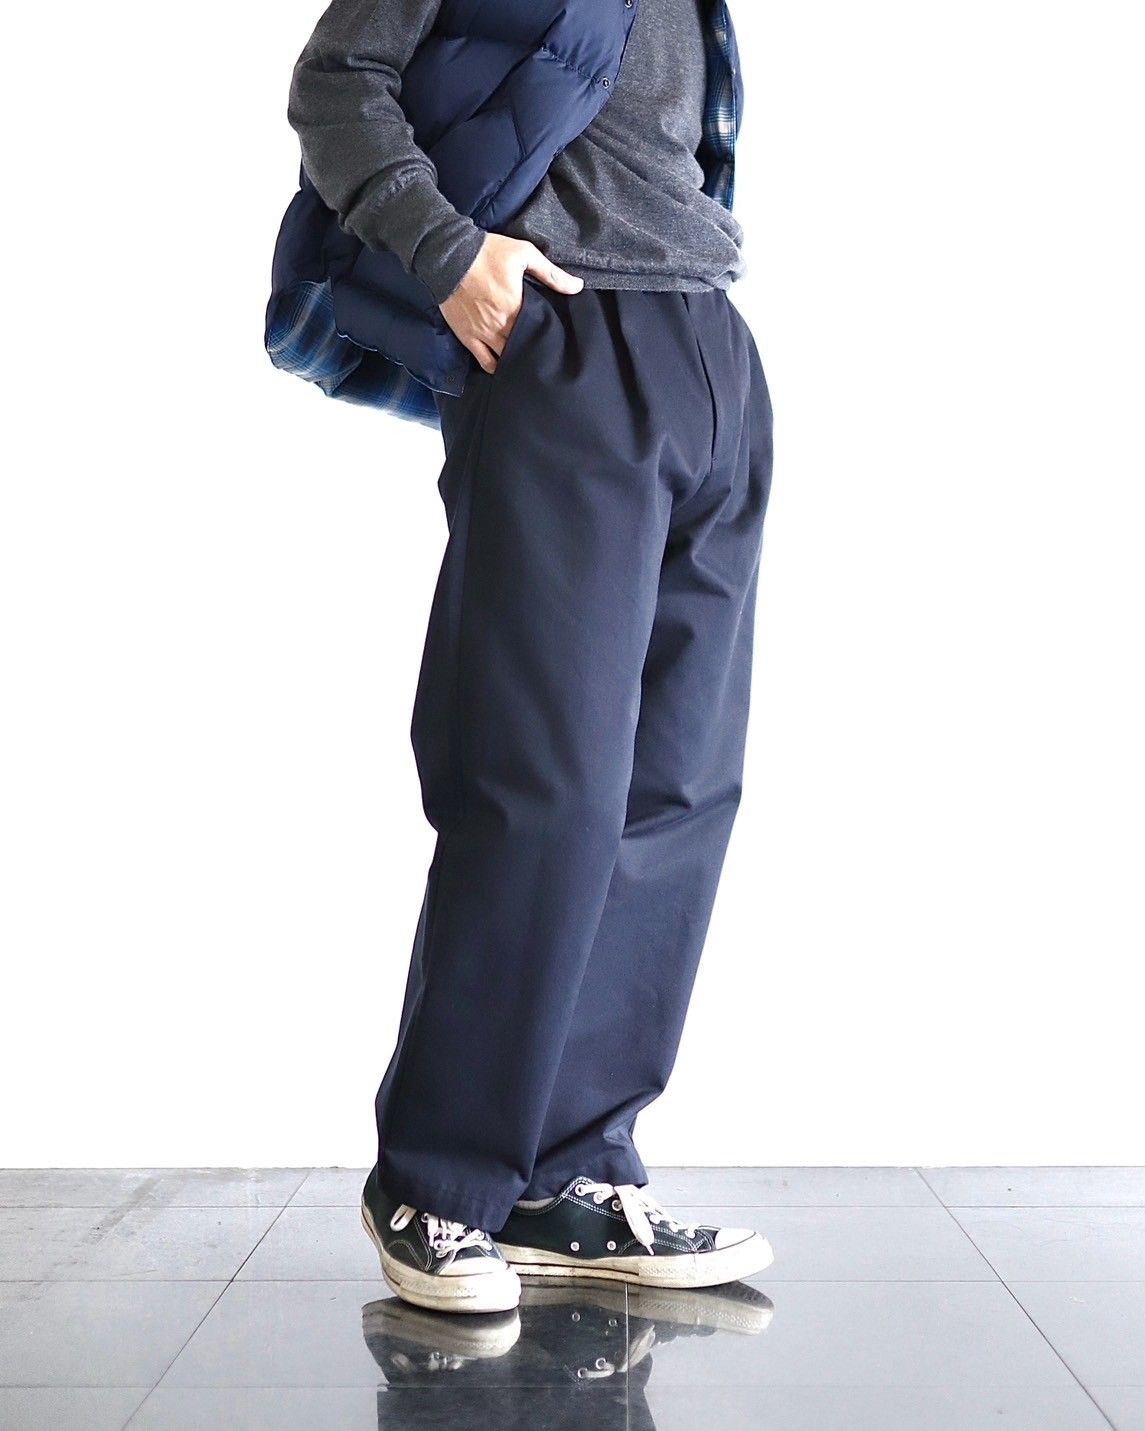 A.PRESSE アプレッセ Type.1 Silk Blend Chino Trousersスタイル ...